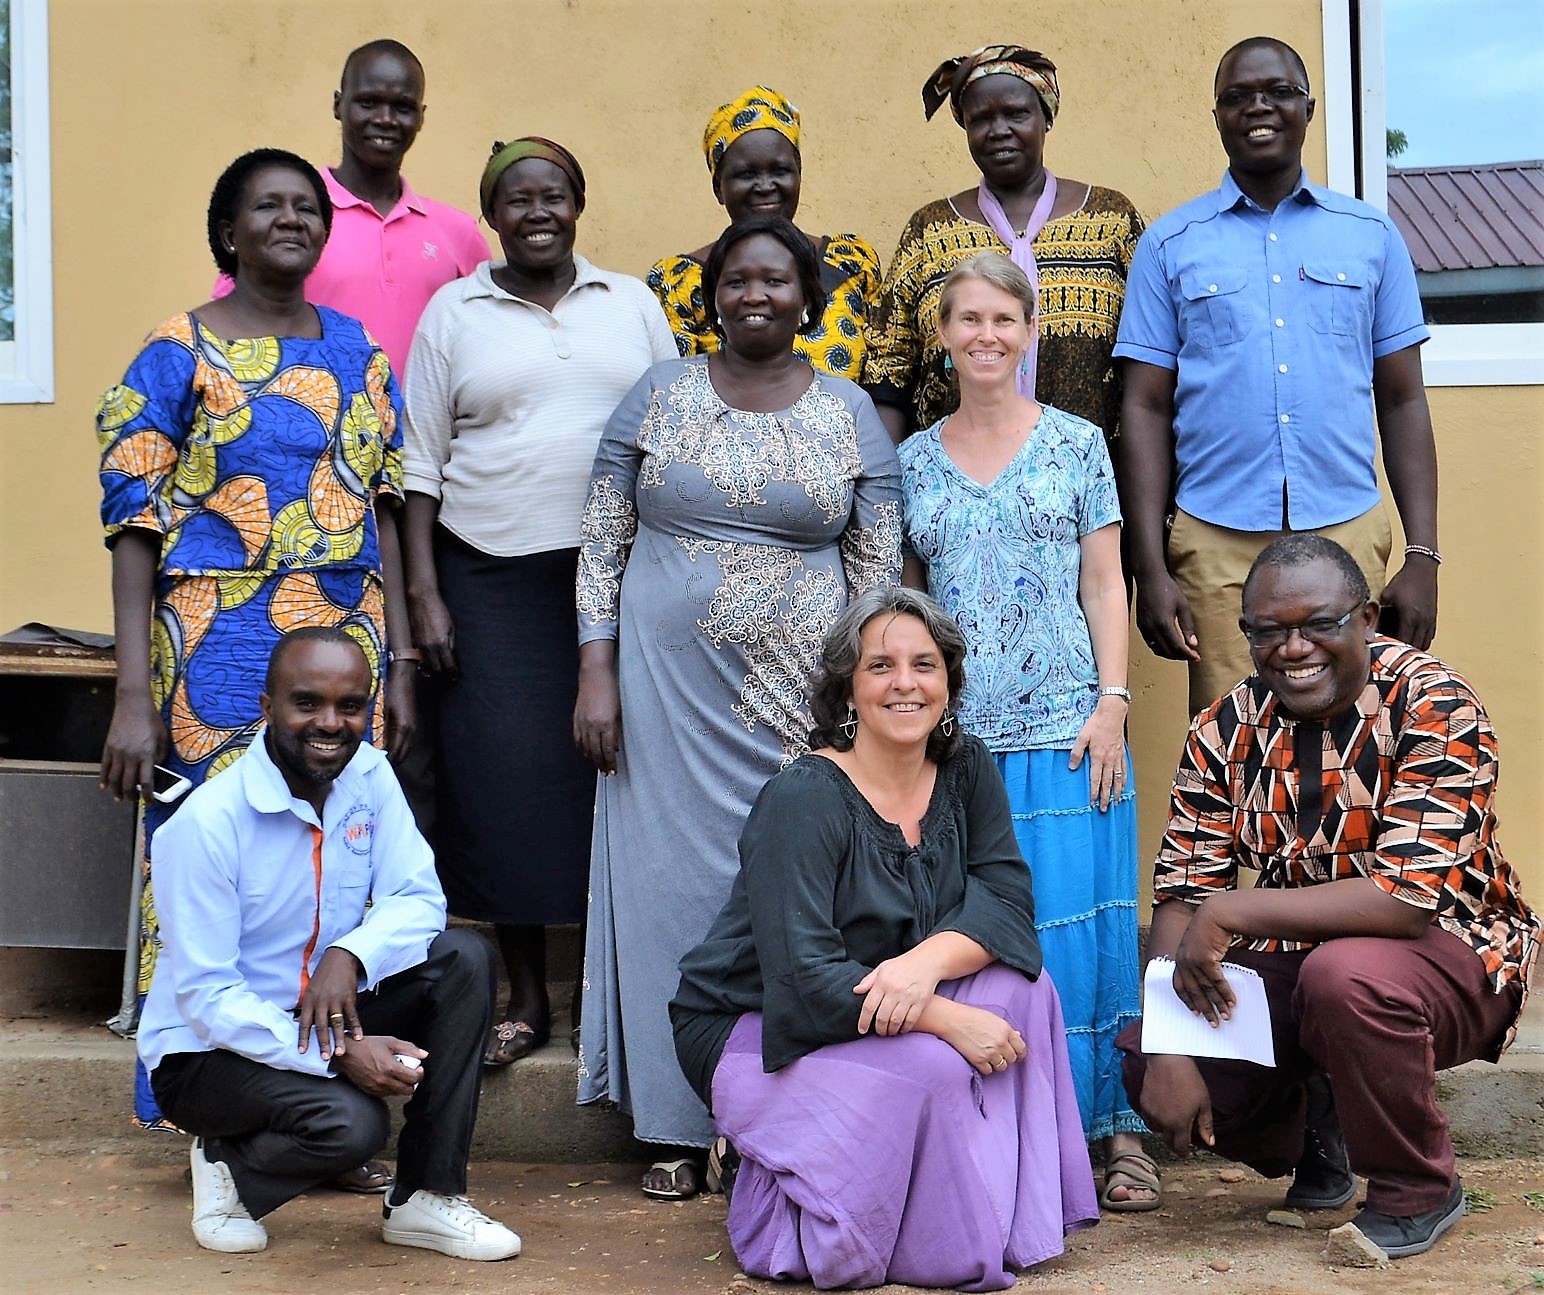 Kristi with fellow members of the Coalition of Christian Reconcilers in South Sudan (CoCRiSS).